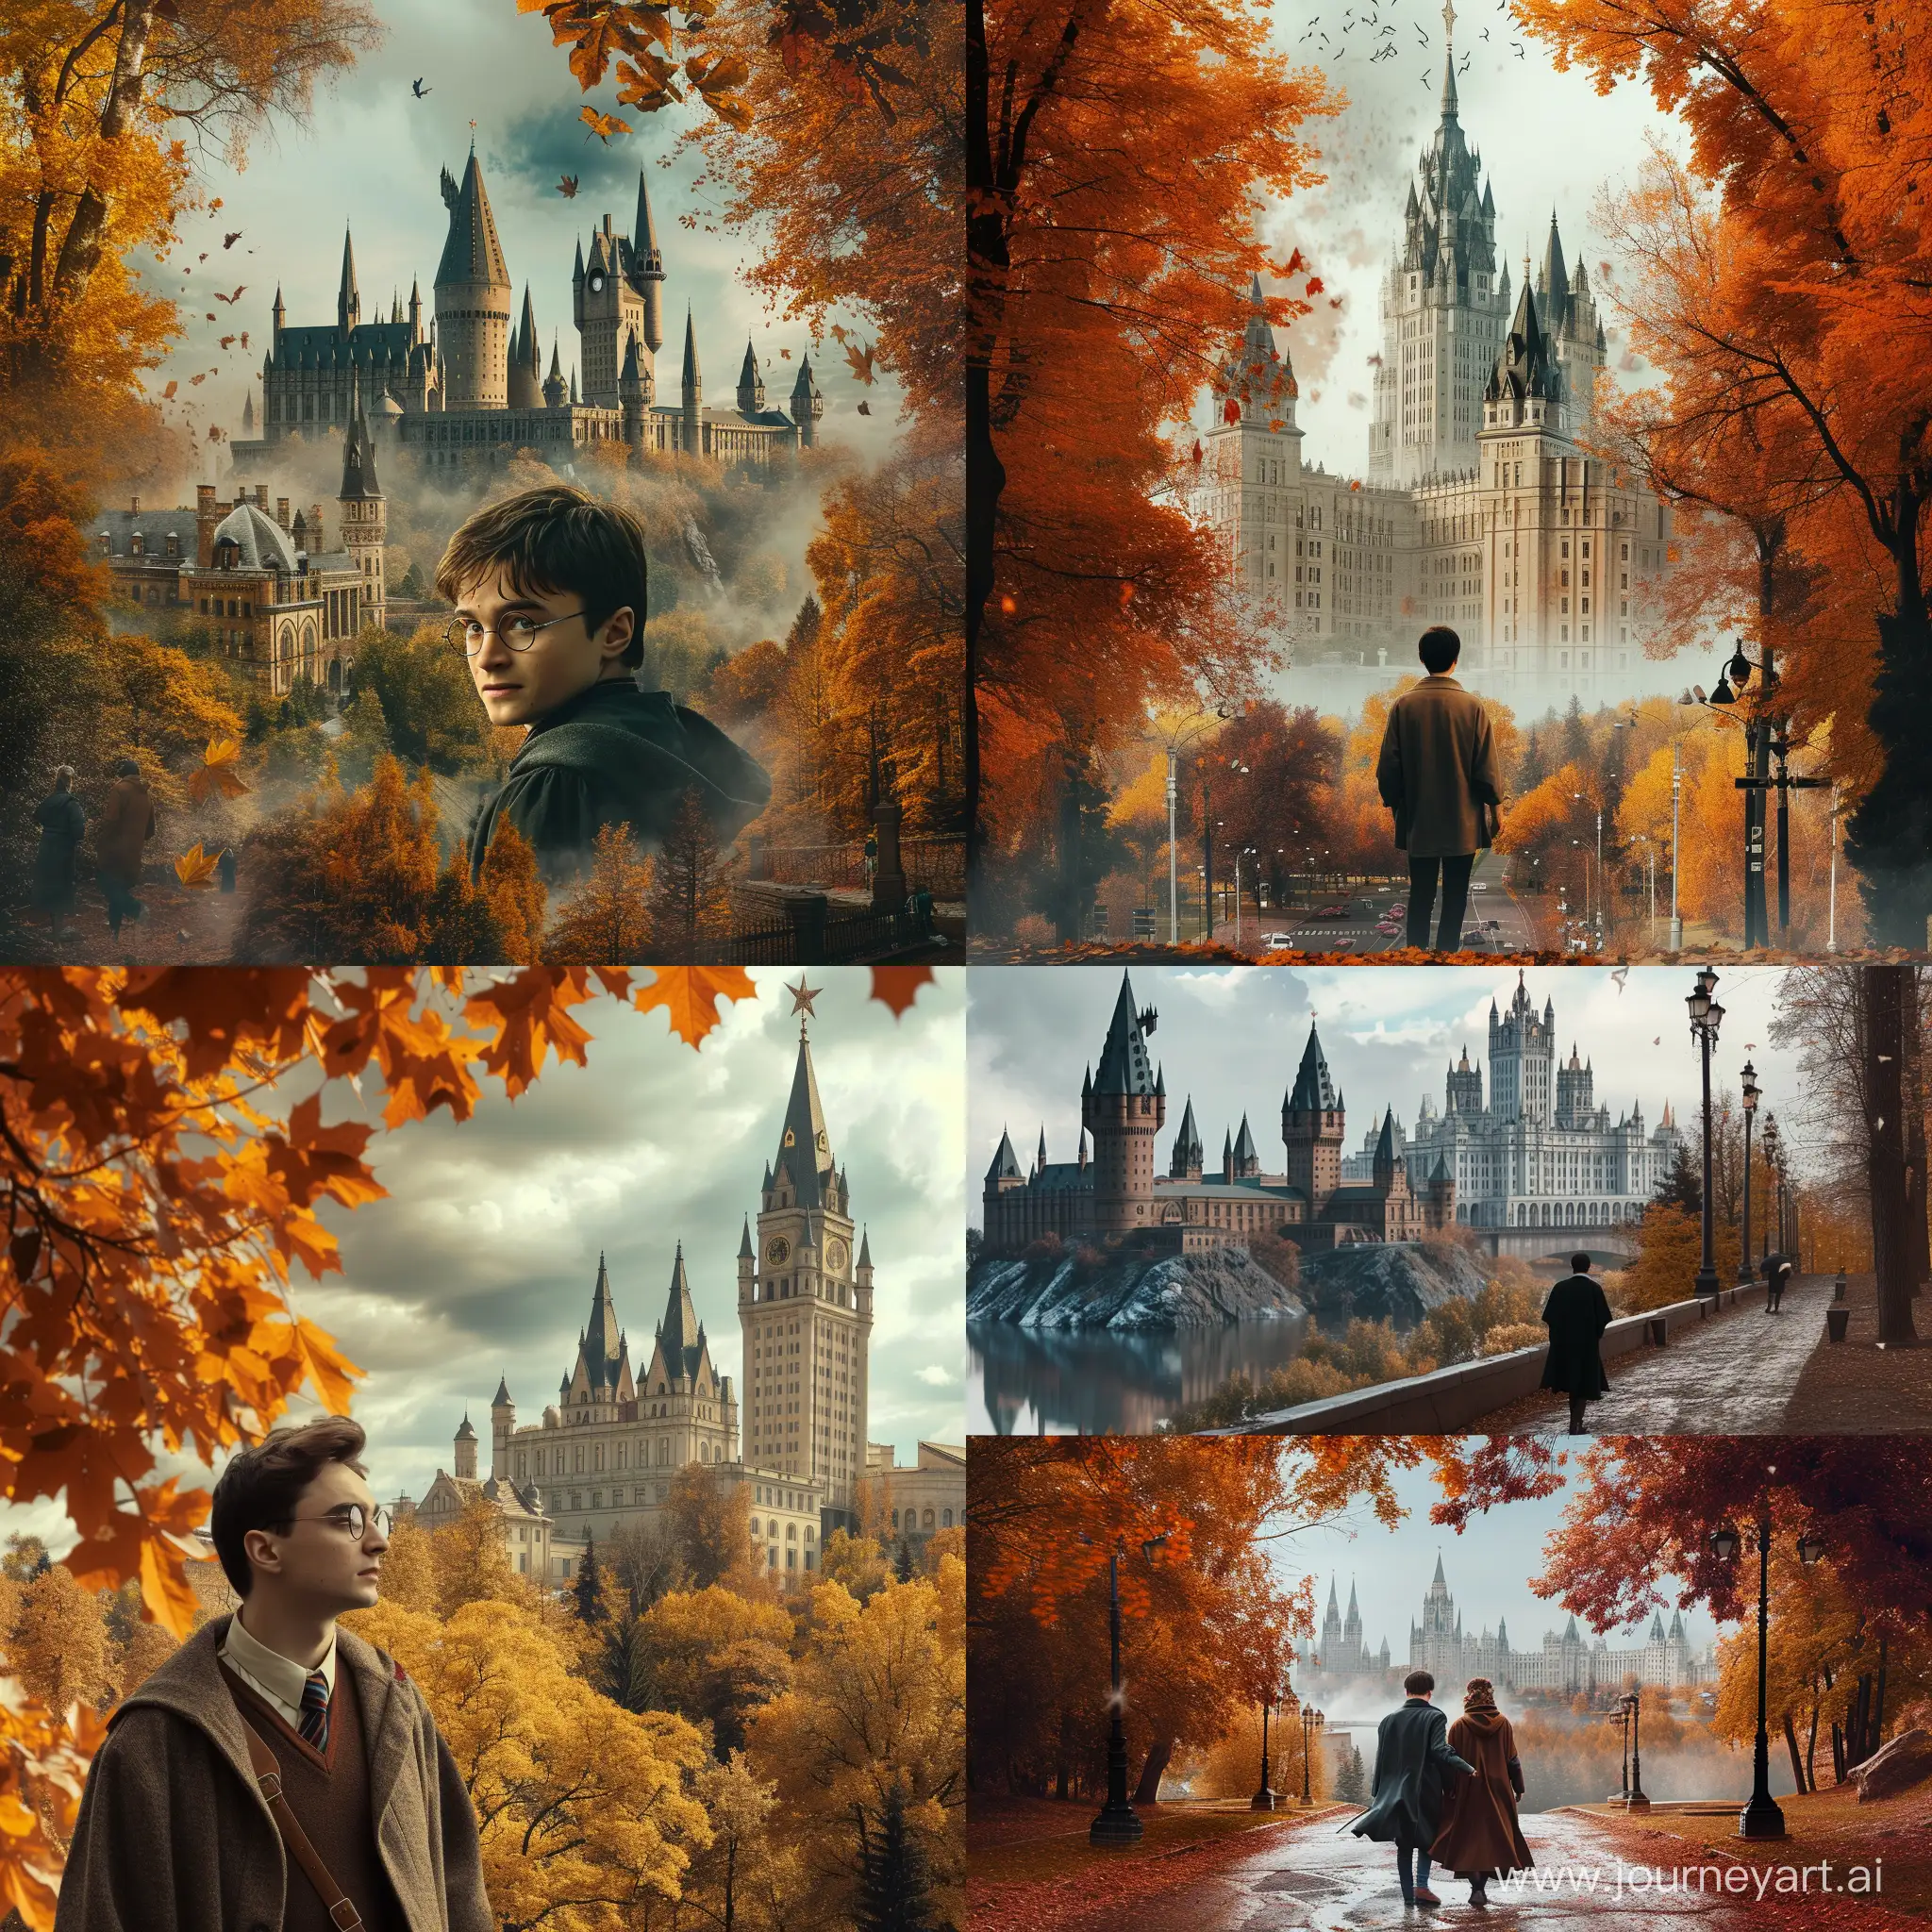 A harry potter movie poster but it in Yaroslavl state university in Russia. On background - main building, and weather is autumn